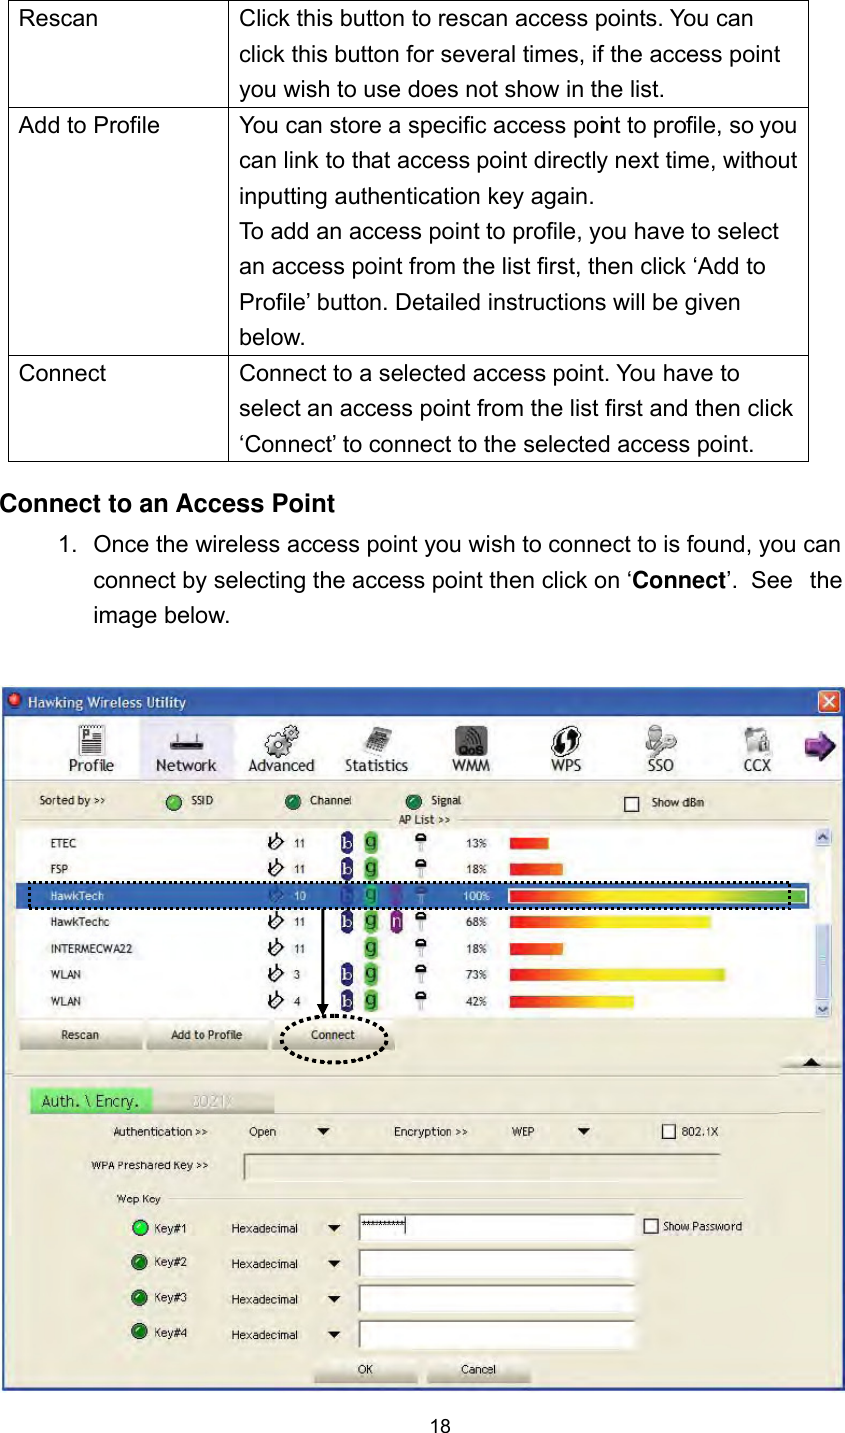  18 Rescan  Click this button to rescan access points. You can click this button for several times, if the access point you wish to use does not show in the list. Add to Profile  You can store a specific access point to profile, so you can link to that access point directly next time, without inputting authentication key again.   To add an access point to profile, you have to select an access point from the list first, then click ‘Add to Profile’ button. Detailed instructions will be given below. Connect  Connect to a selected access point. You have to select an access point from the list first and then click ‘Connect’ to connect to the selected access point. Connect to an Access Point 1.  Once the wireless access point you wish to connect to is found, you can connect by selecting the access point then click on ‘Connect’.  See  the image below.     